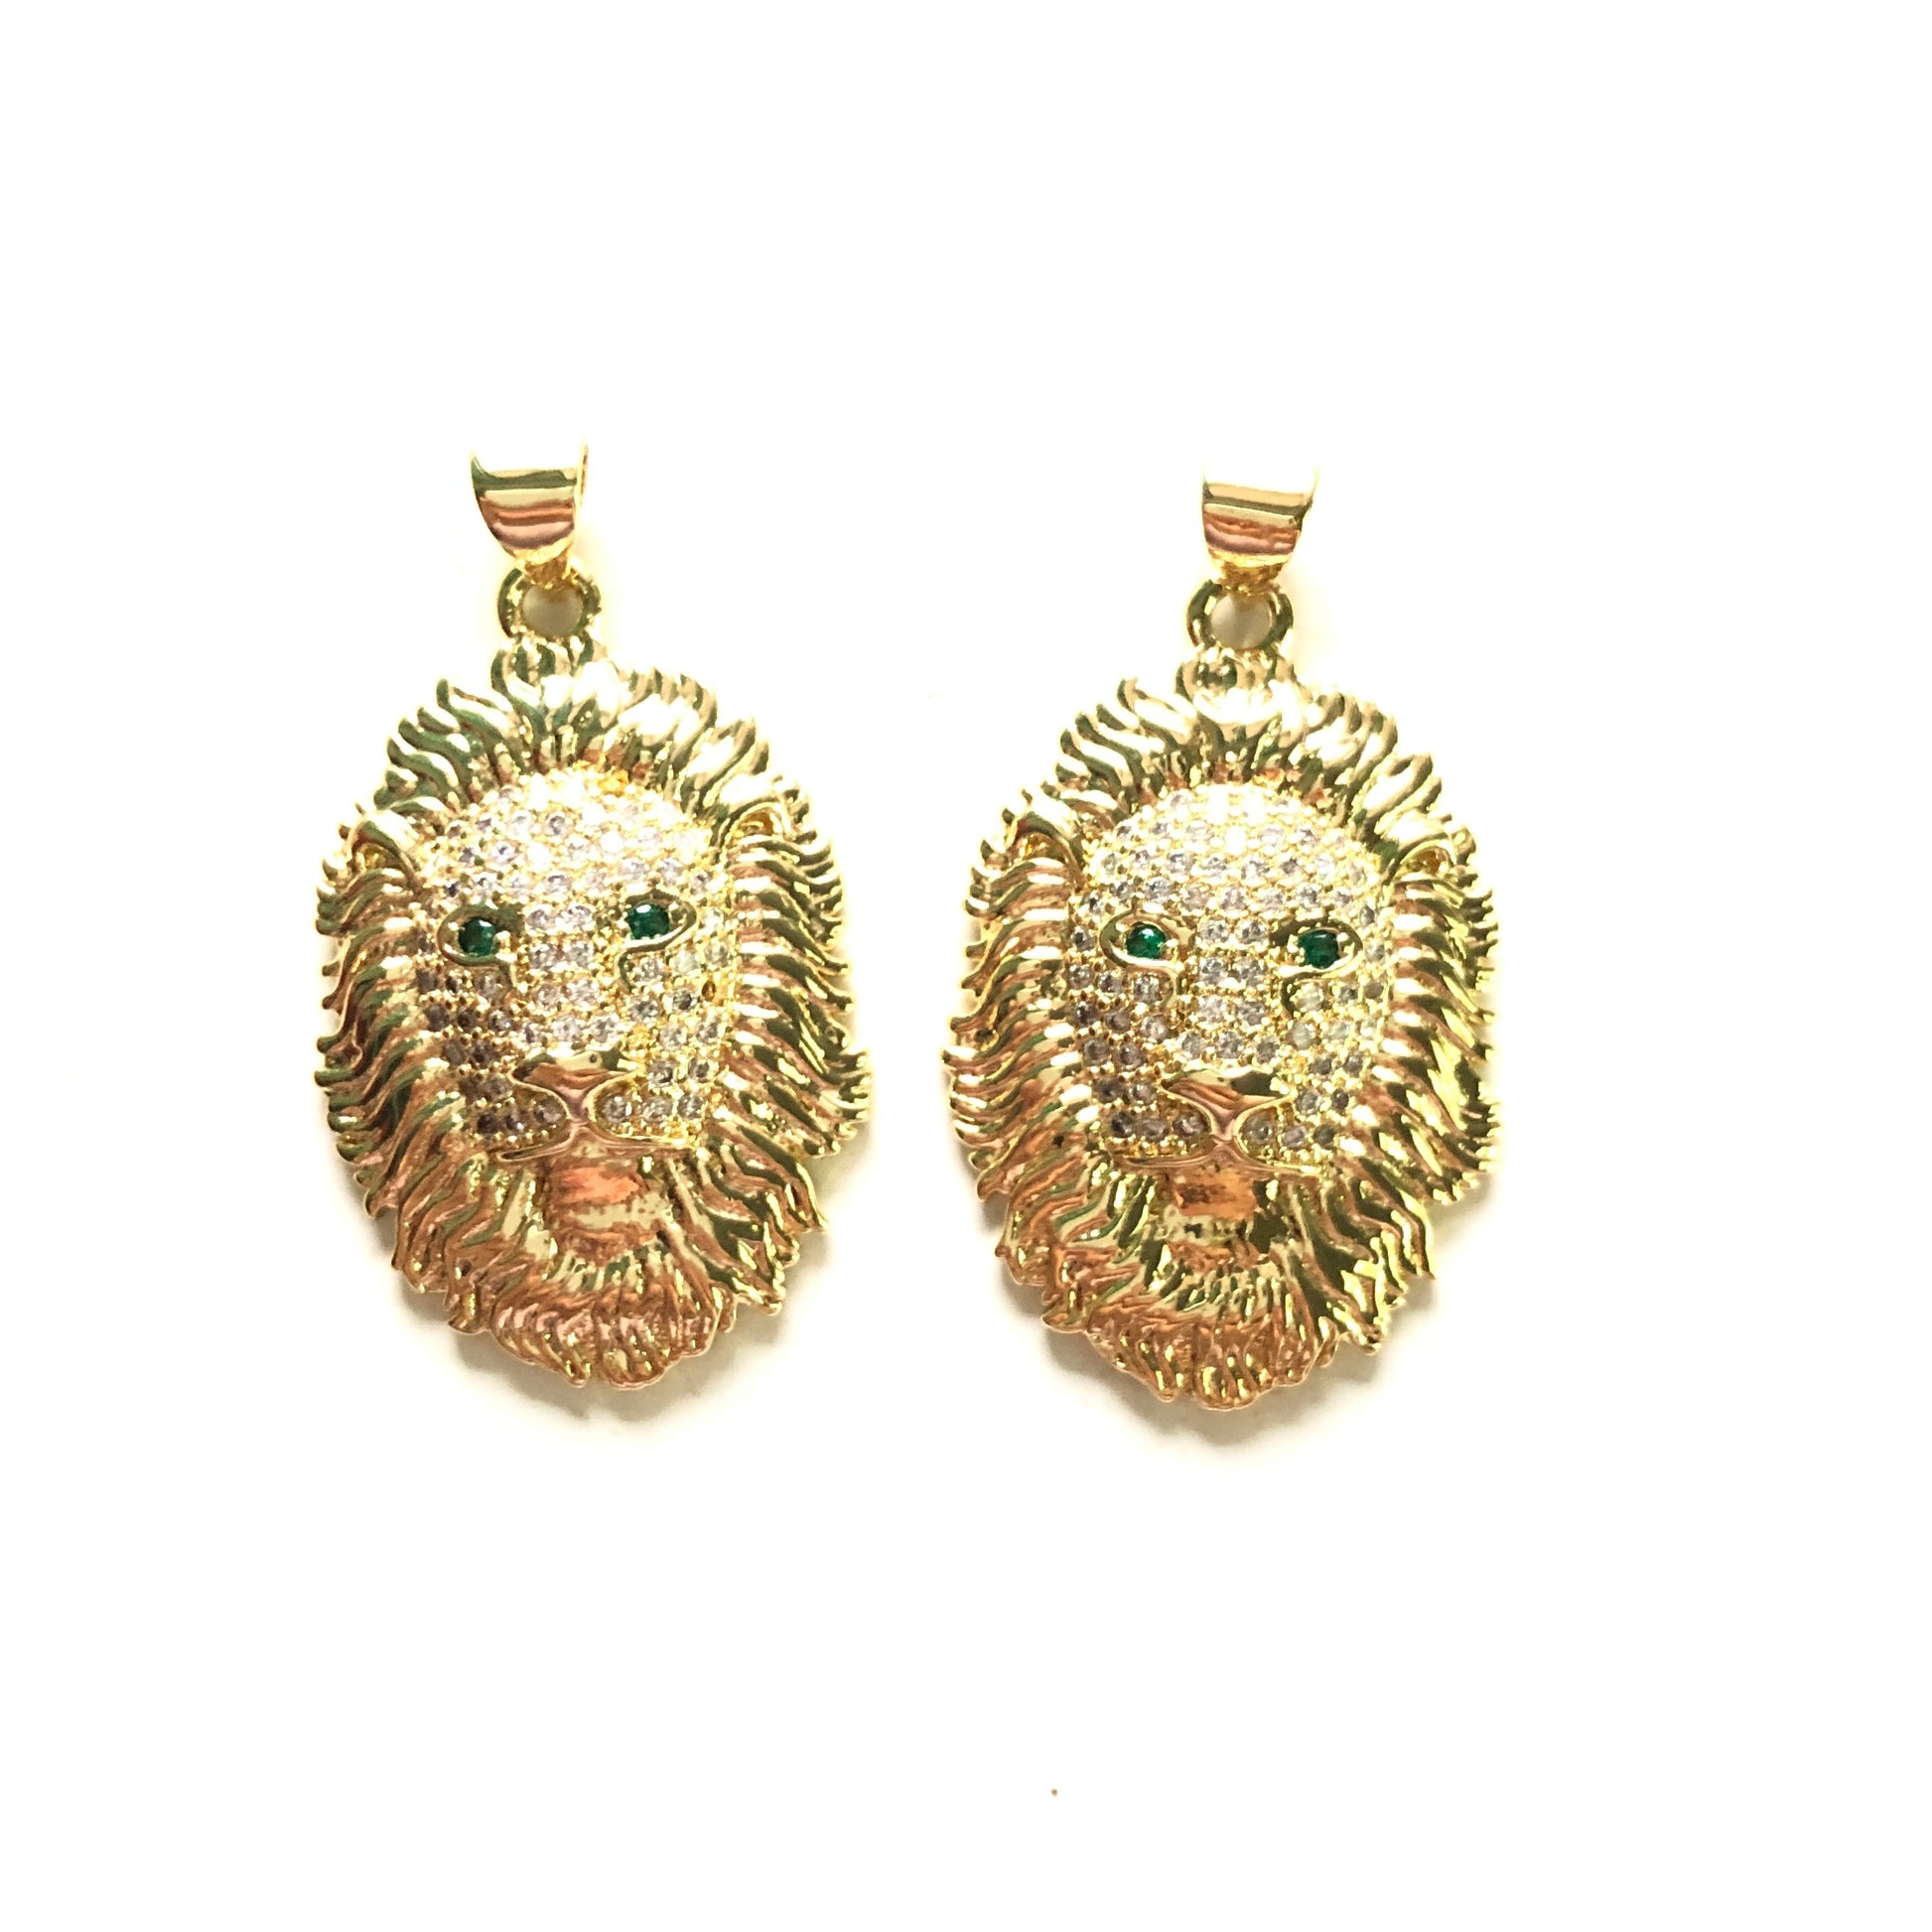 5pcs/lot 31*21mm Gold CZ Lion Charm Pendants CZ Paved Charms Animals & Insects Charms Beads Beyond